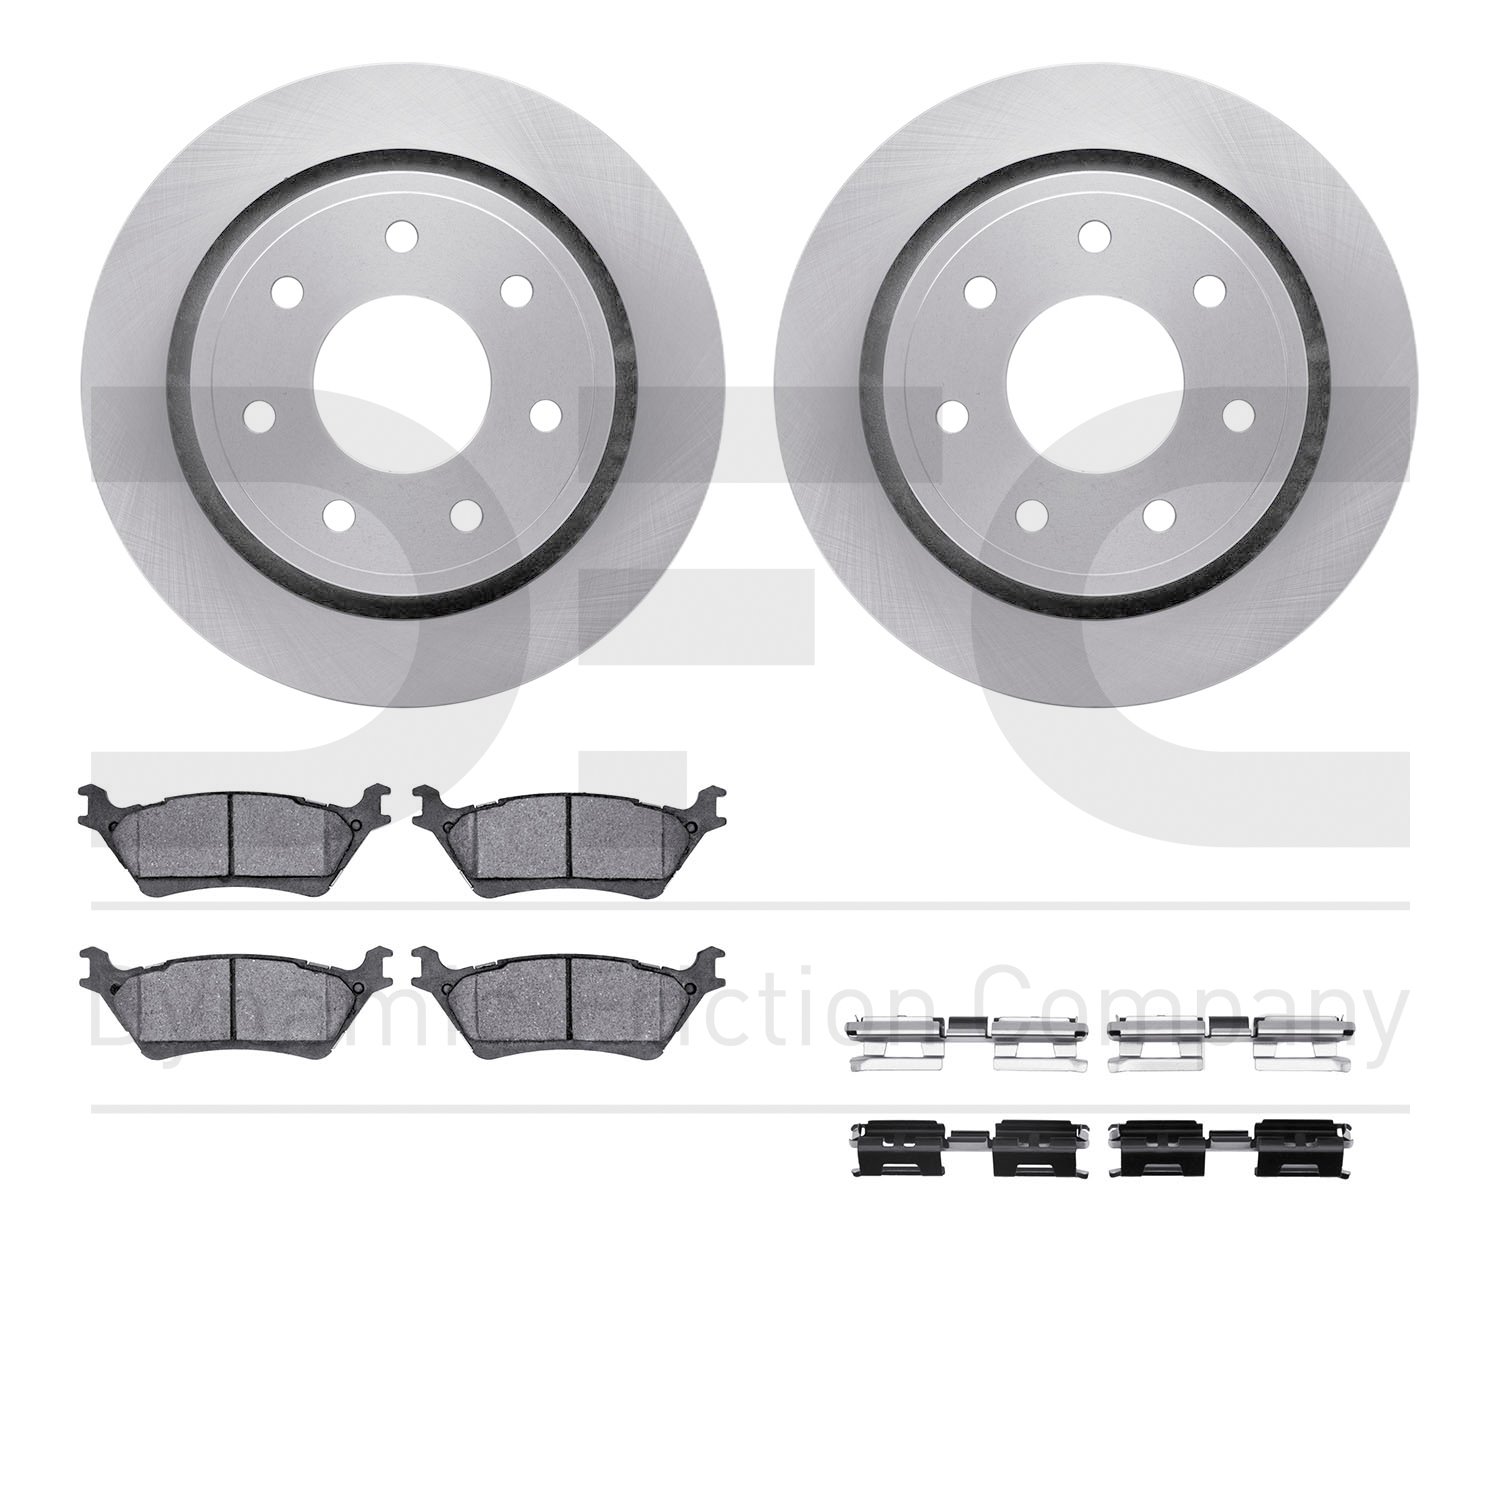 6412-54284 Brake Rotors with Ultimate-Duty Brake Pads Kit & Hardware, 2012-2014 Ford/Lincoln/Mercury/Mazda, Position: Rear